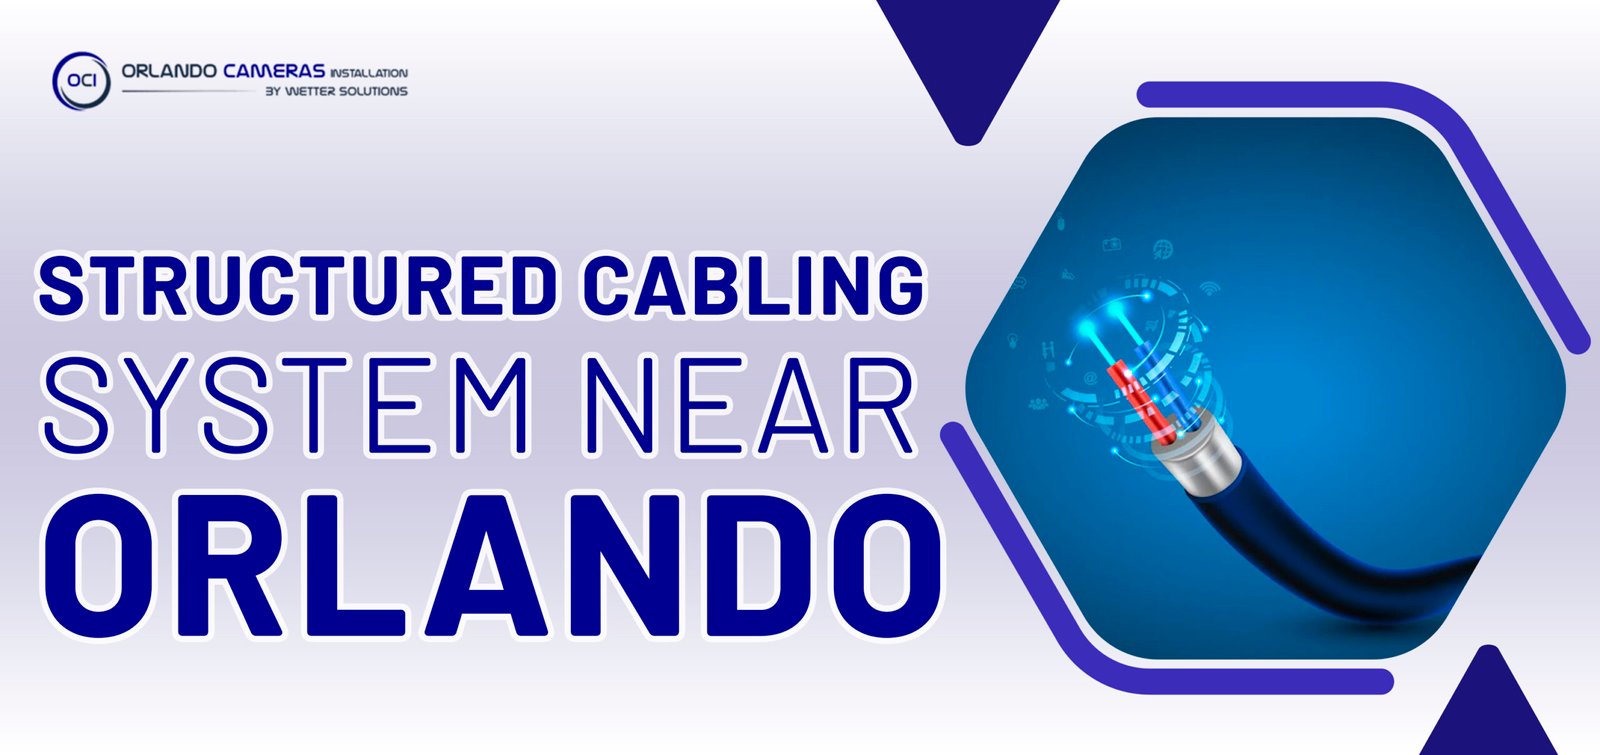 Structured cabling system near Orlando